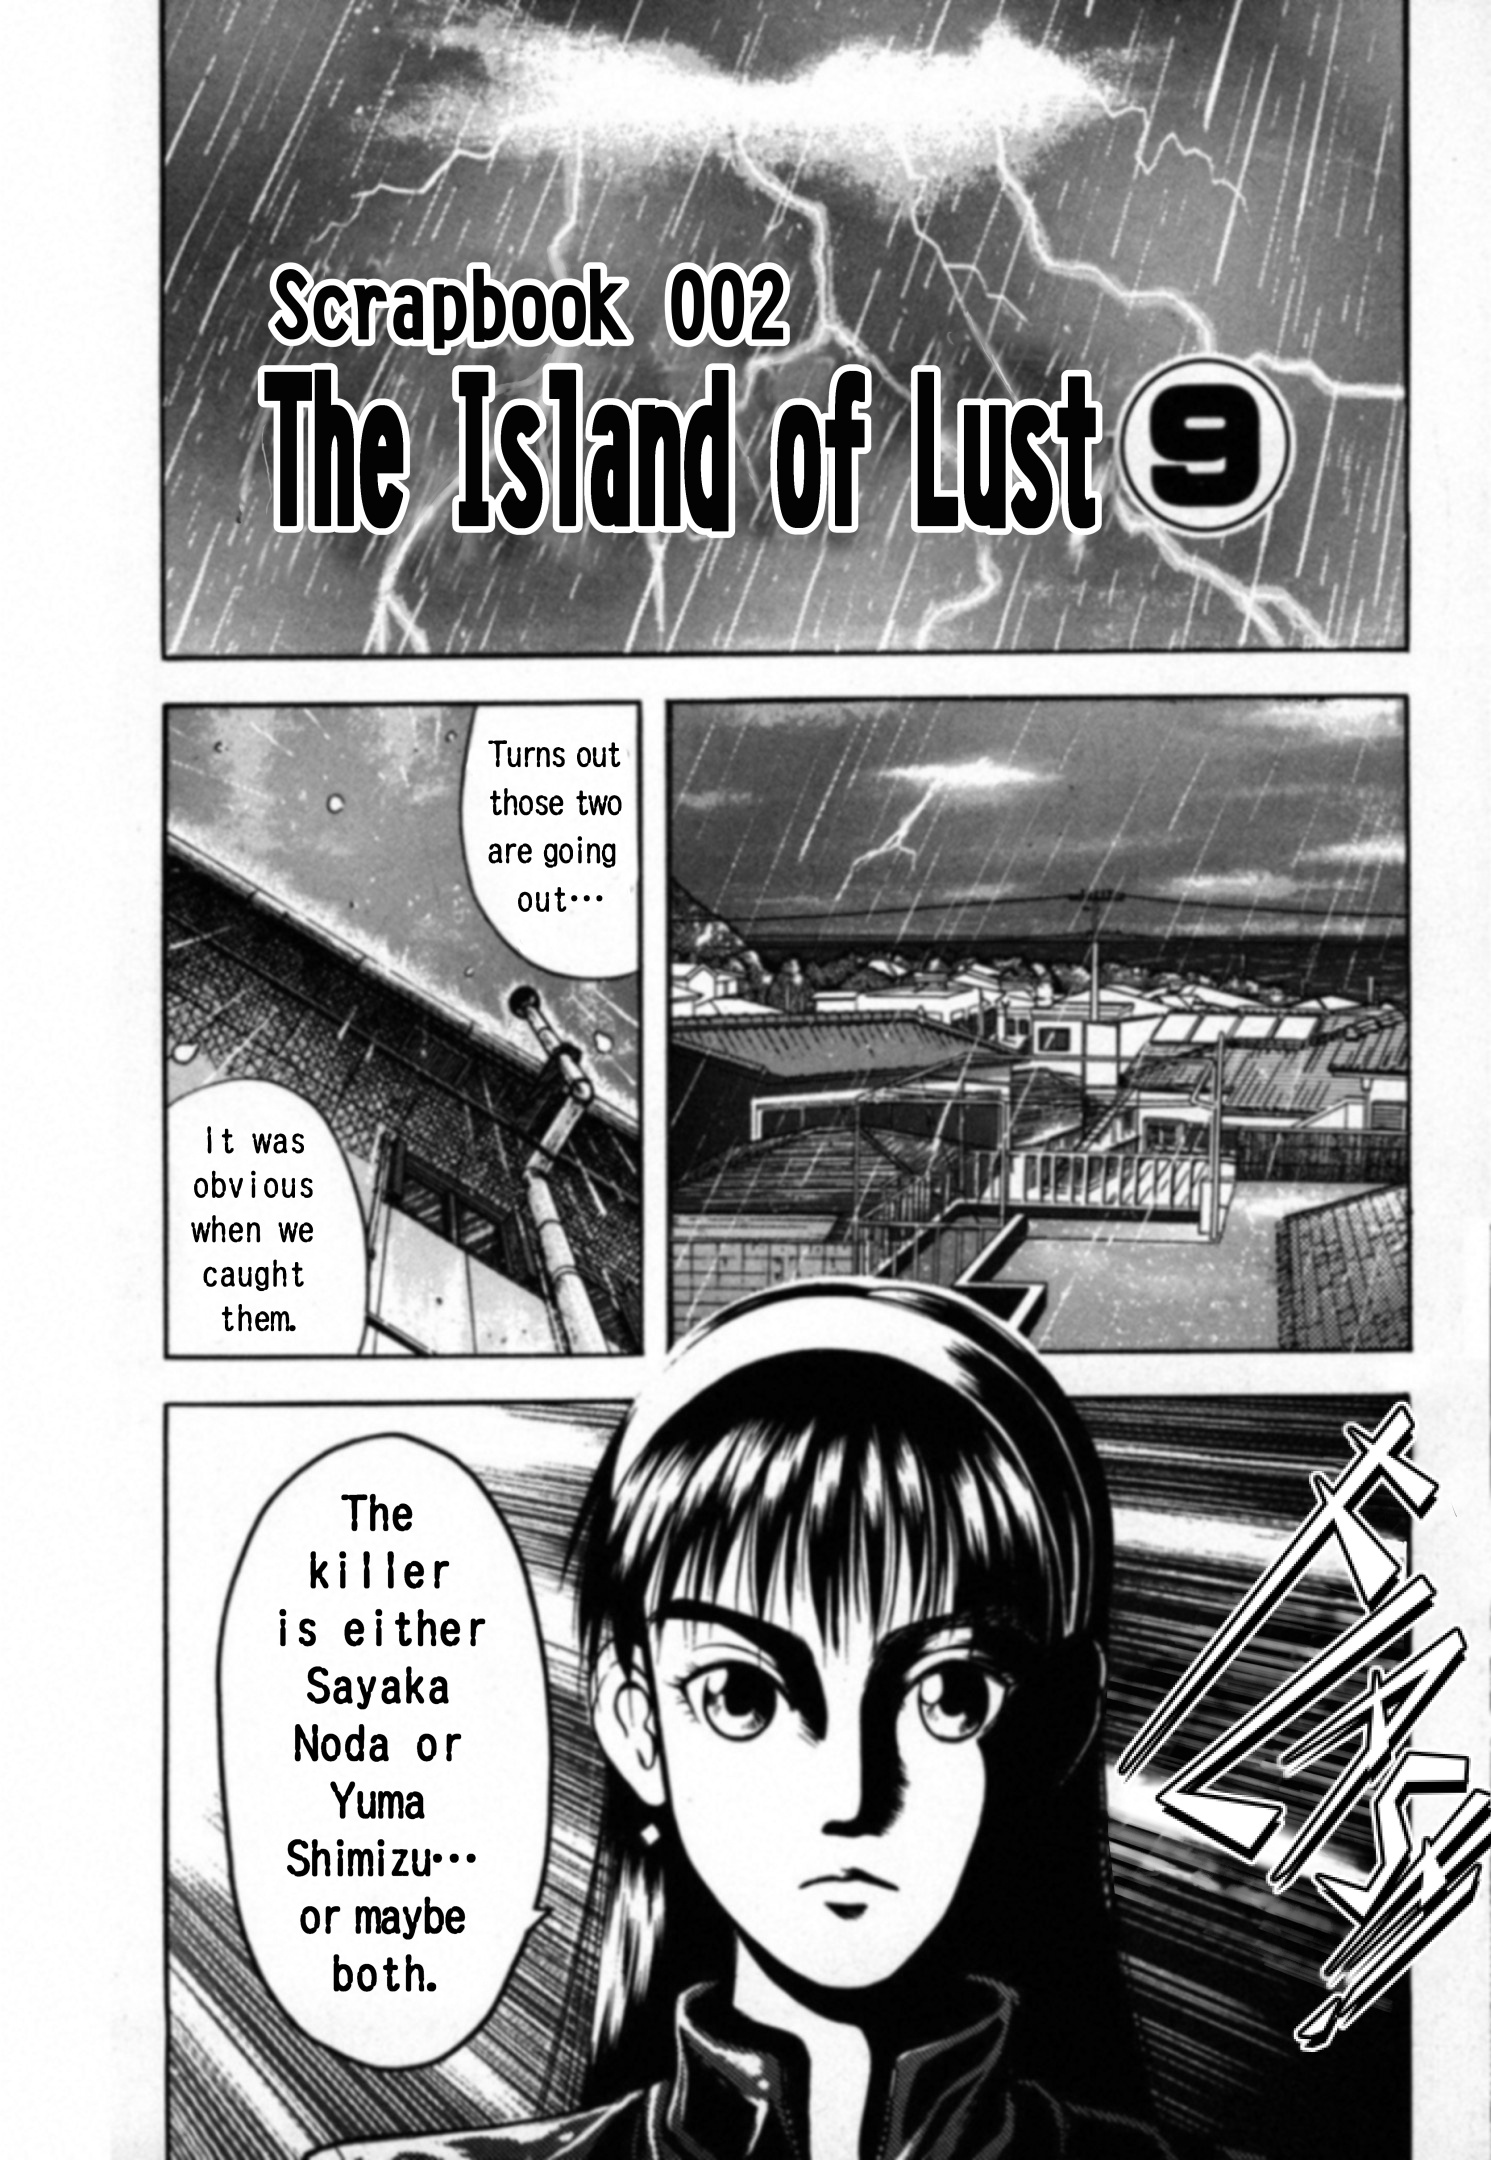 Kakeru Vol.2 Chapter 19: The Island Of Lust - 9 - Picture 1